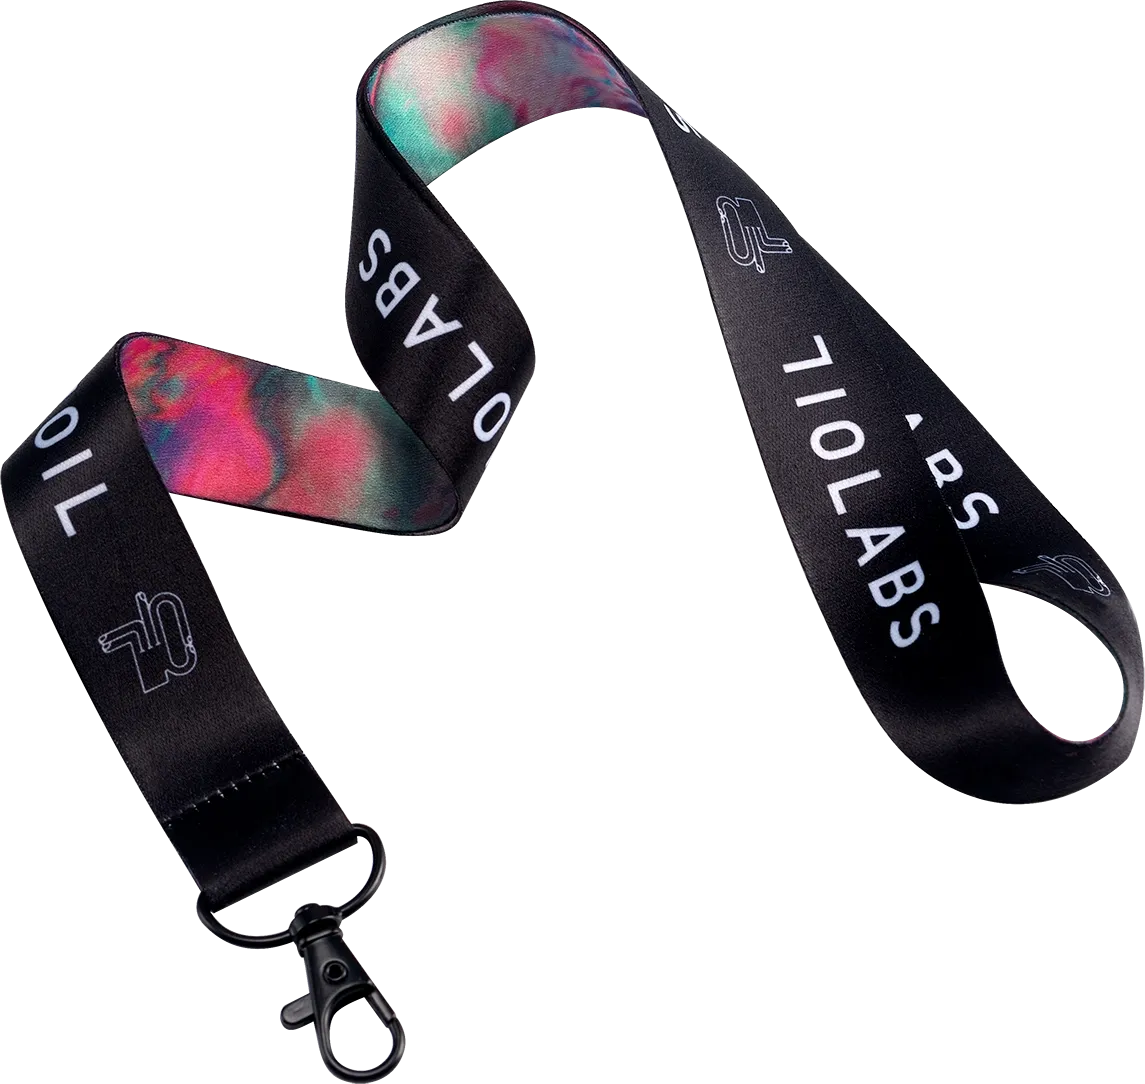 Lanyards - Webcam Covers Now